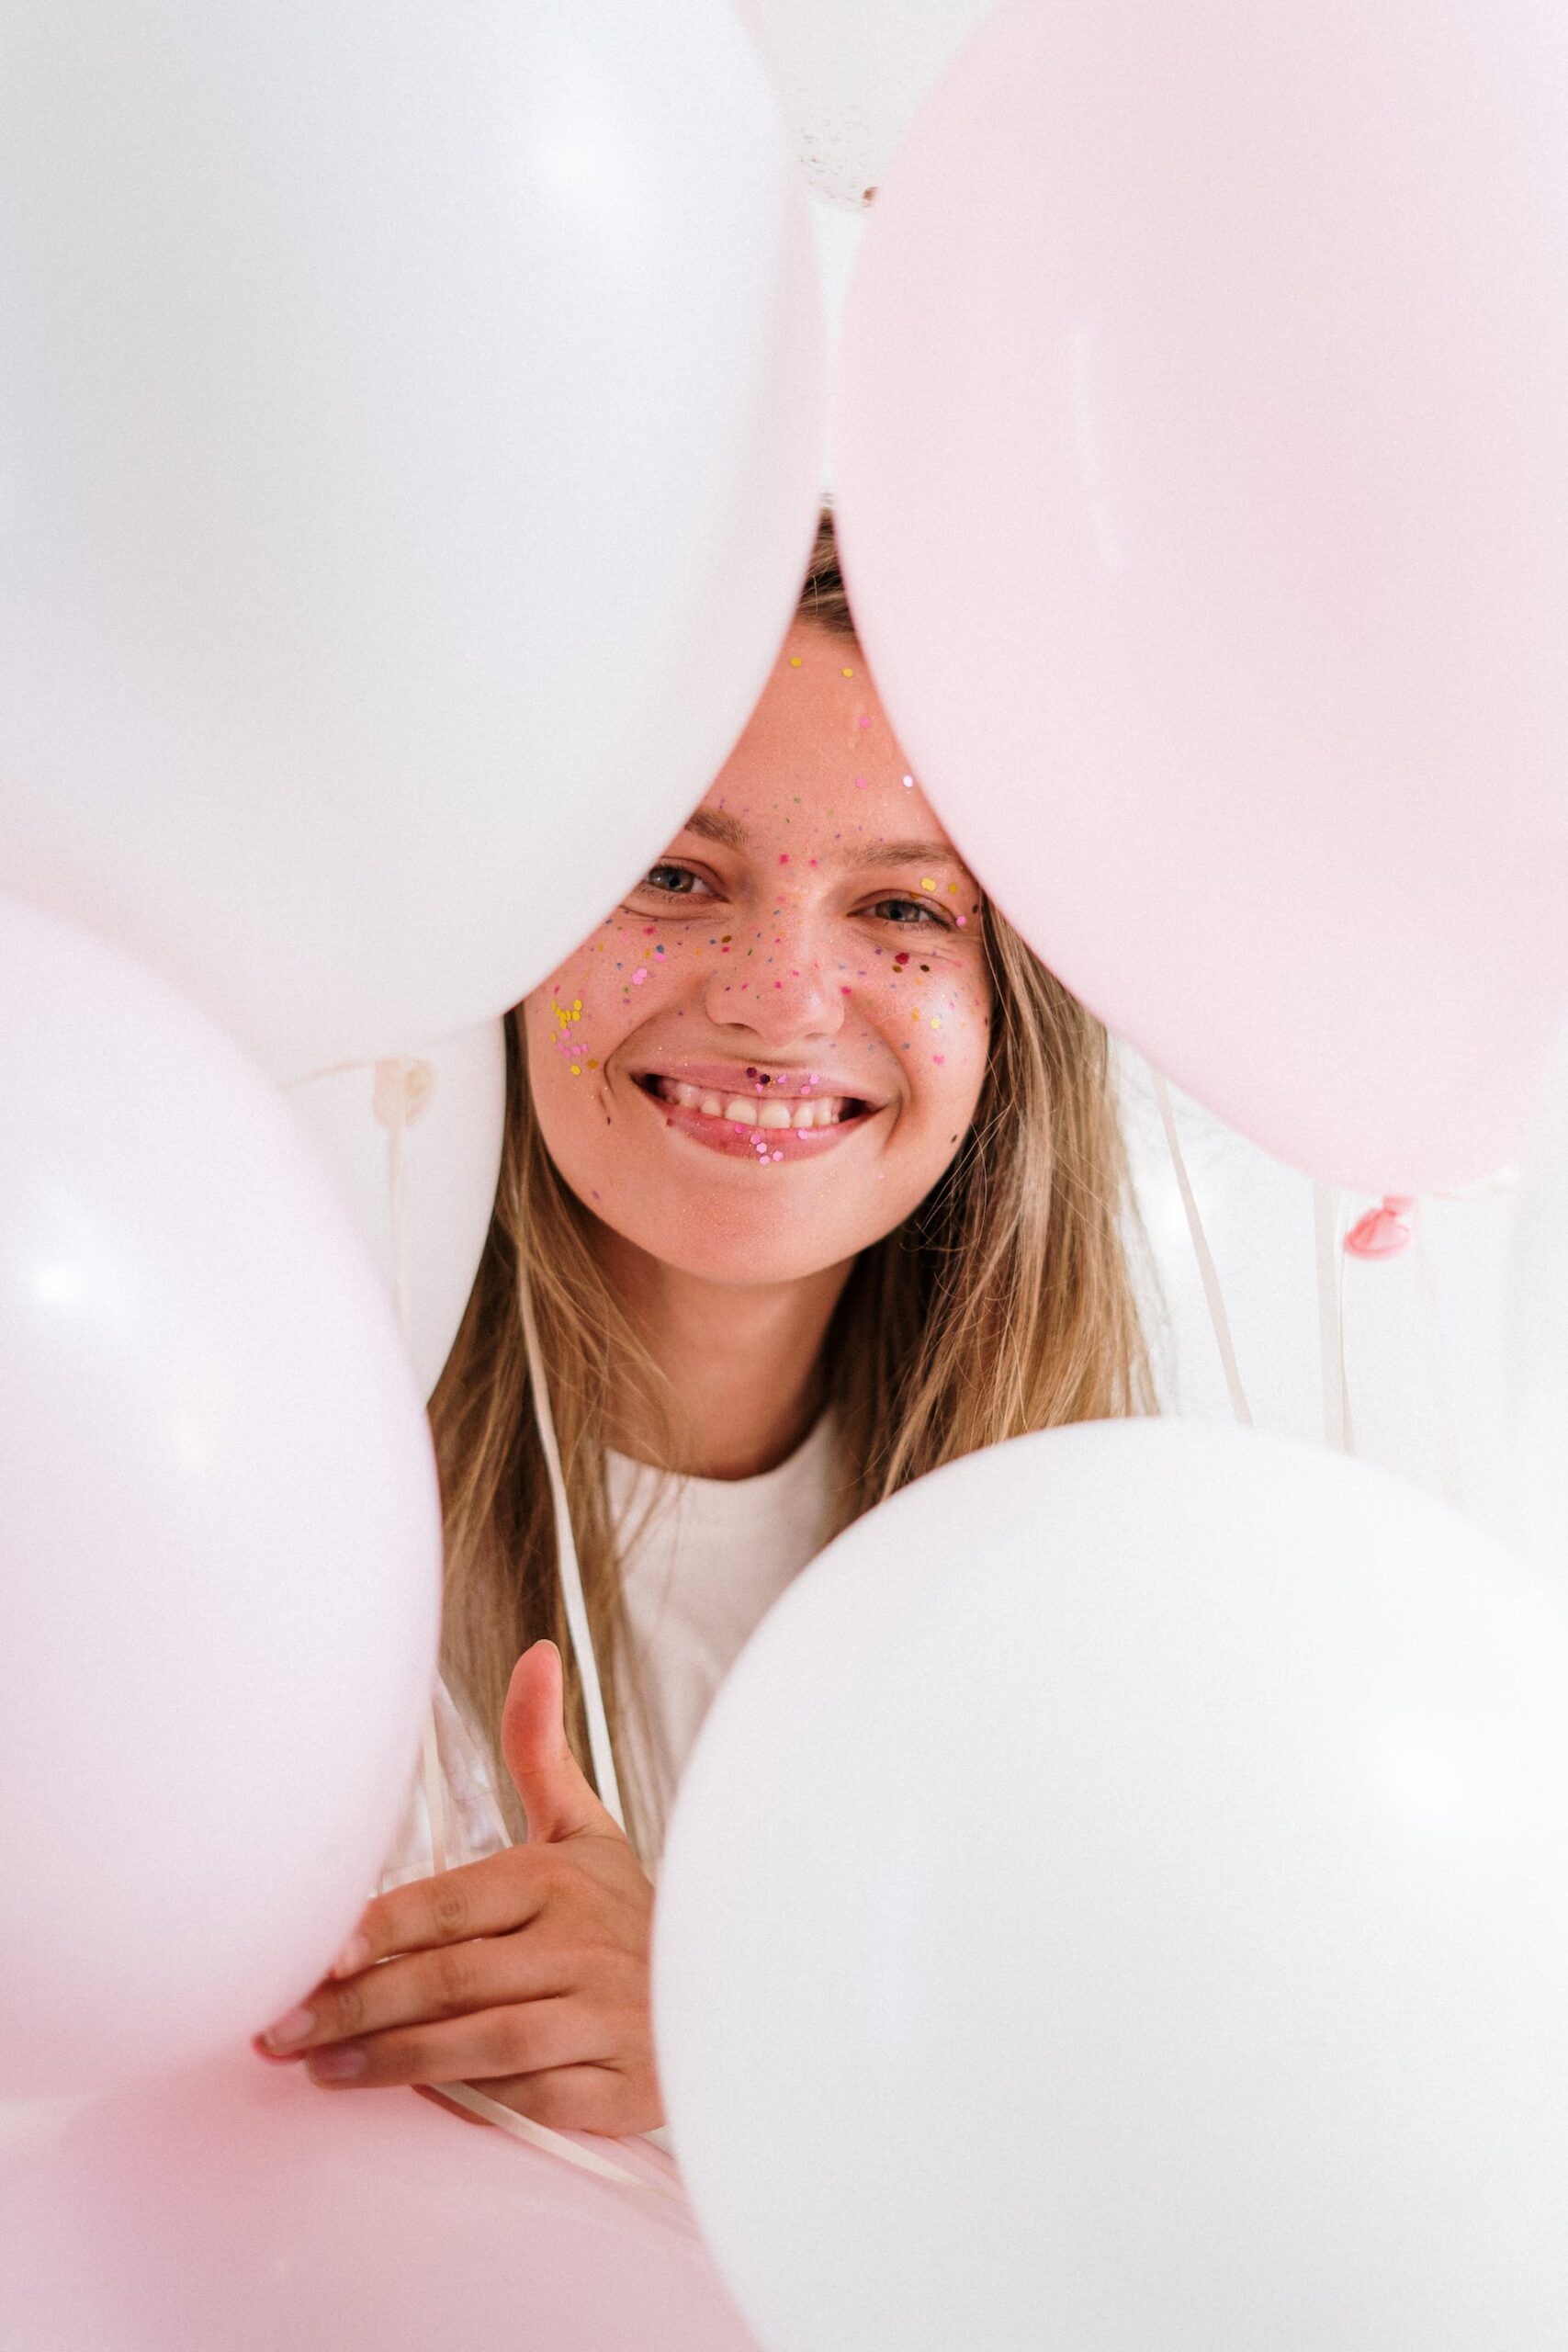 A young girl smiling while holding balloons | Source: Pexels